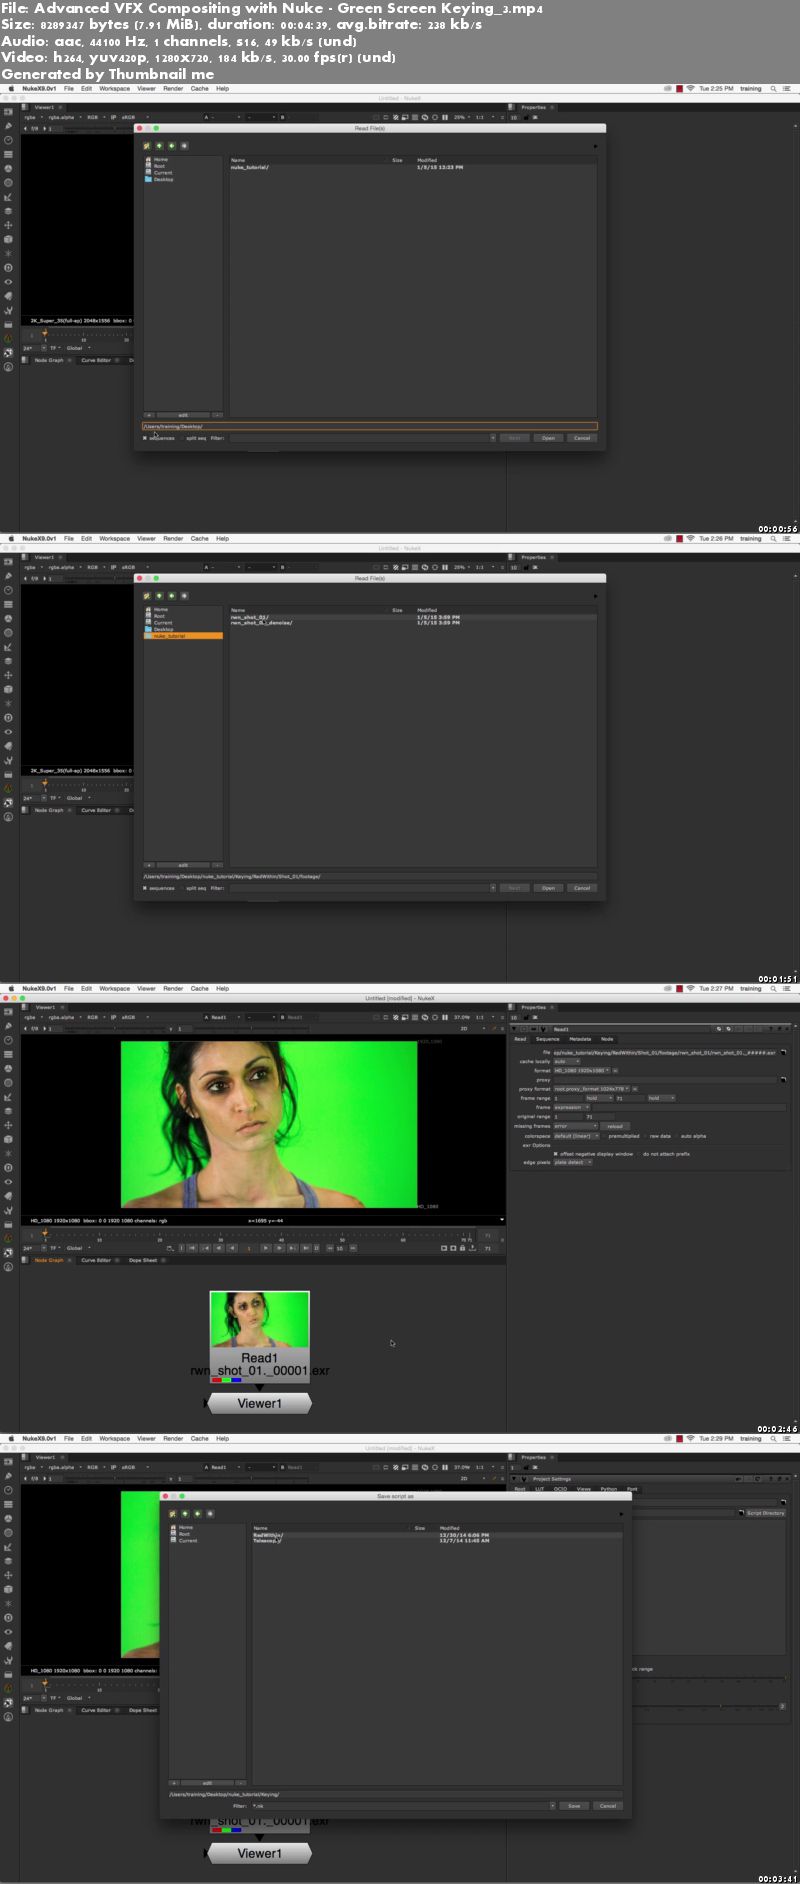 Advanced VFX Compositing with Nuke : Green Screen Keying